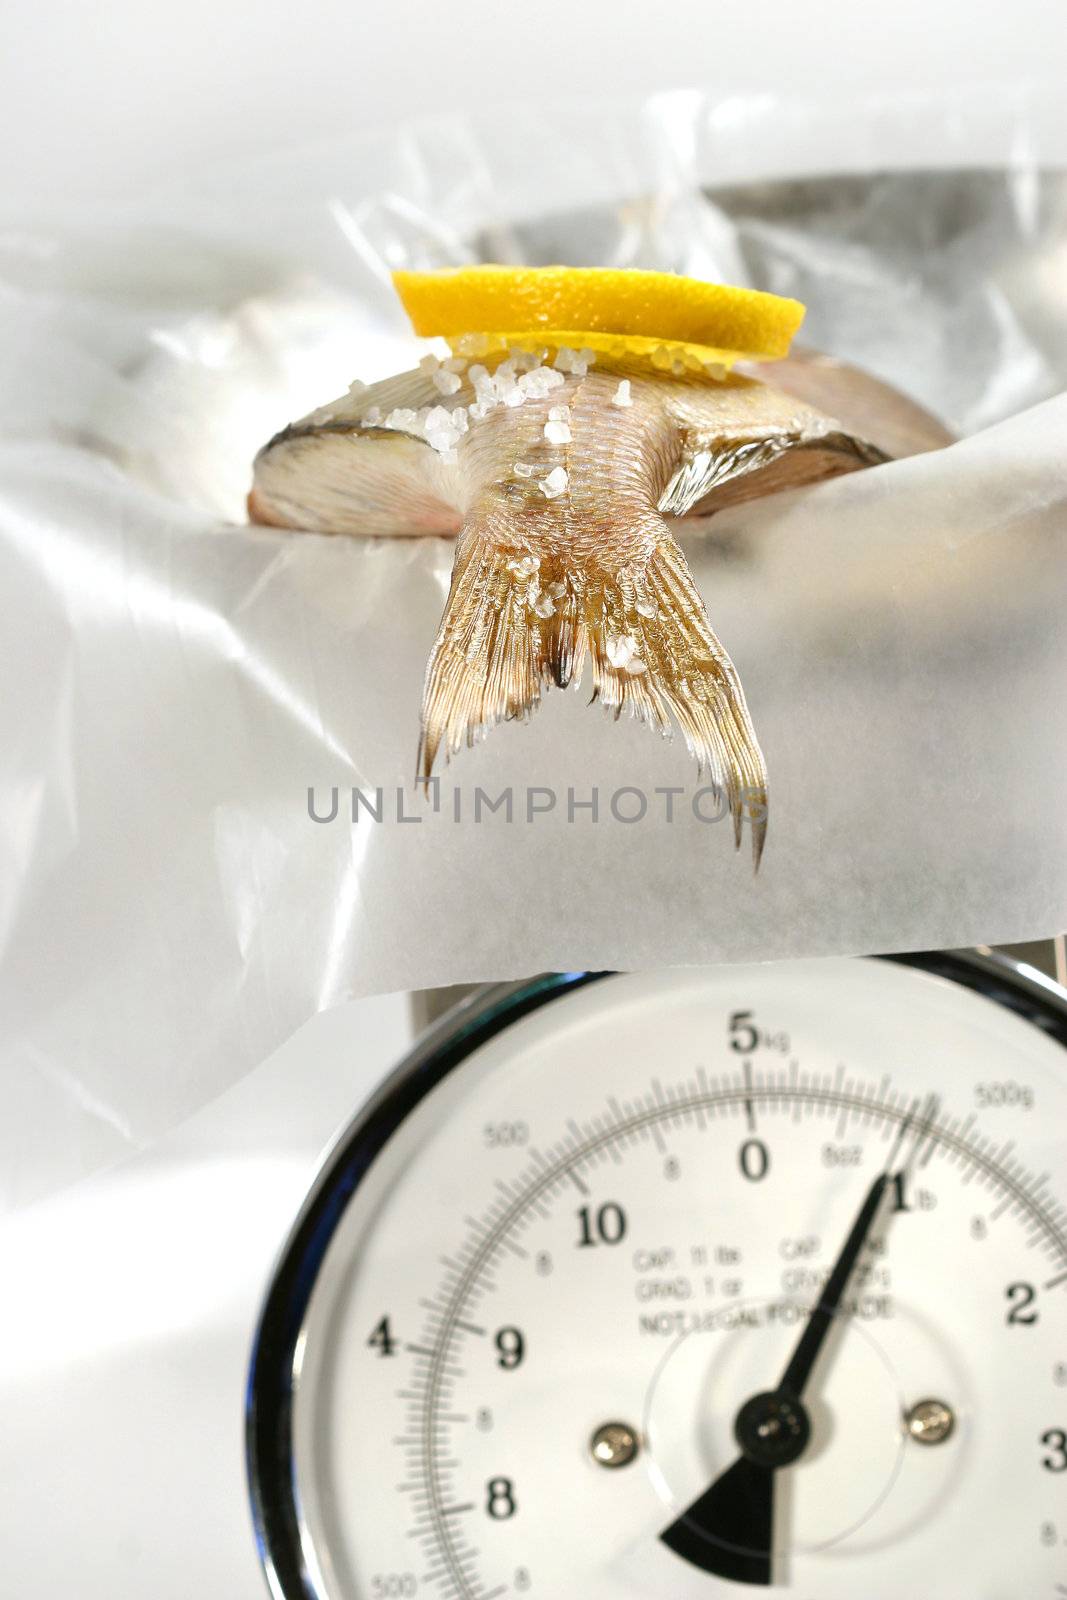 Fish with lemon slice on weight scale by Sandralise